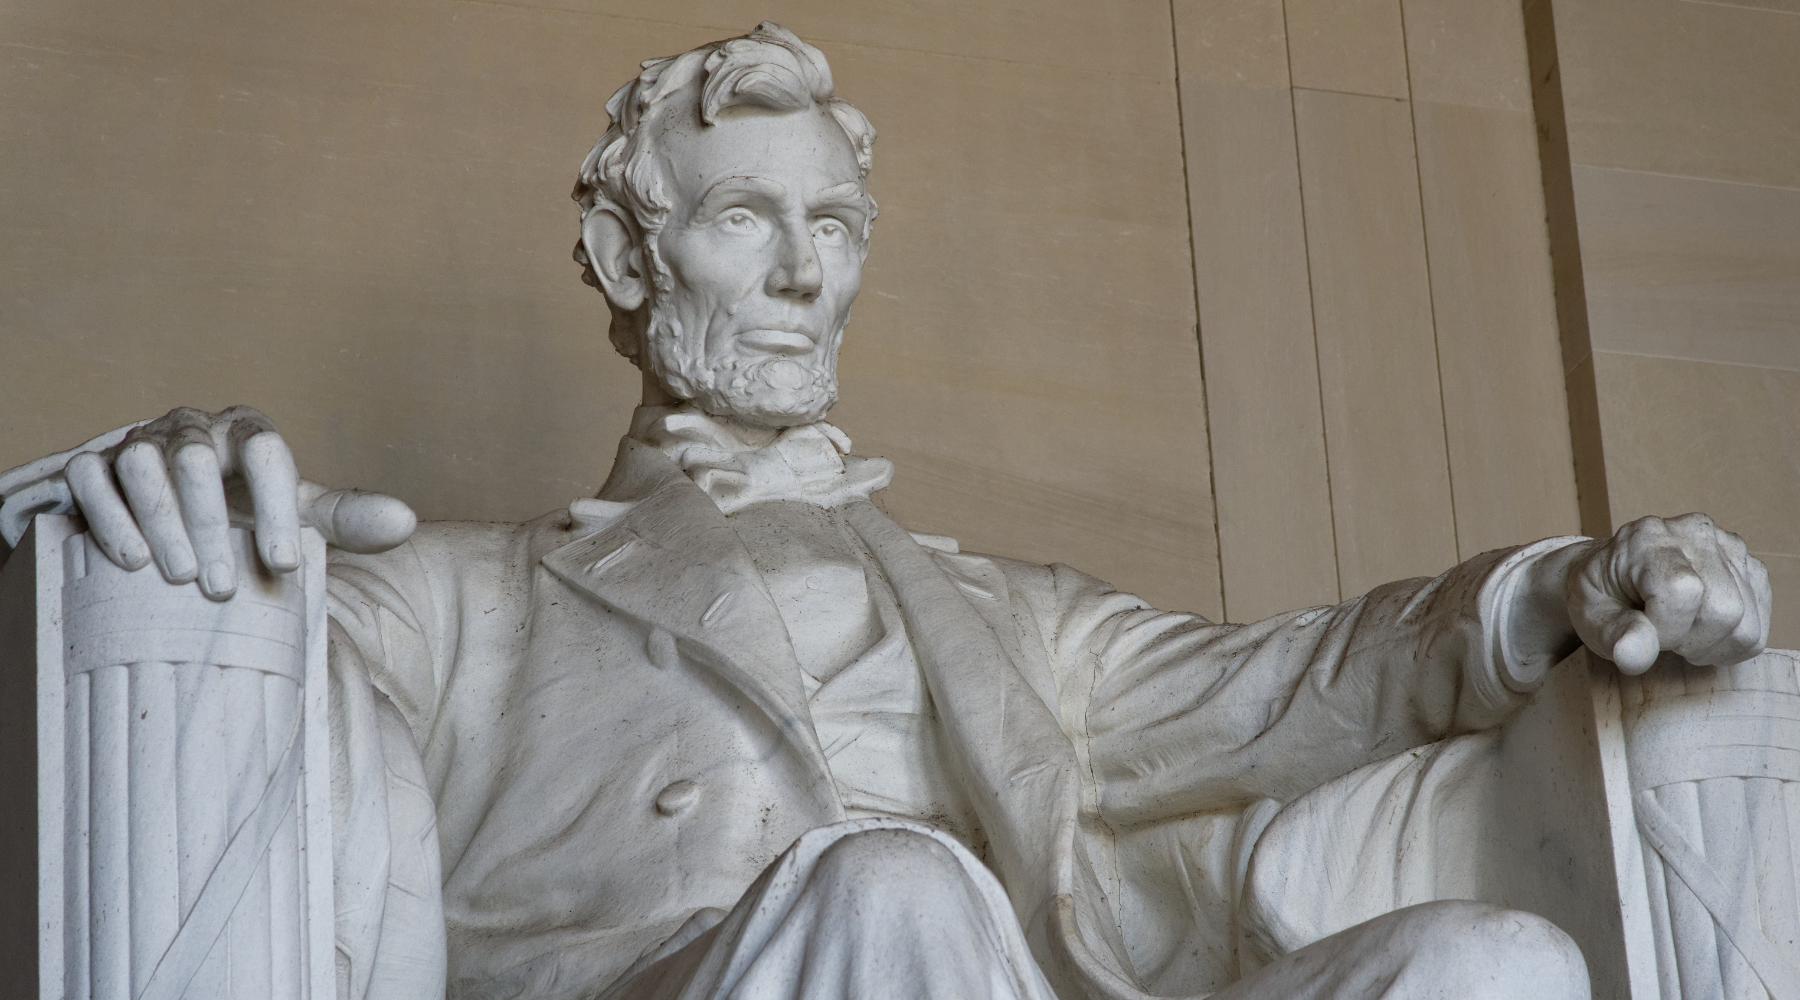 Abraham Lincoln Memorial statue. Lincoln suffered from depression.